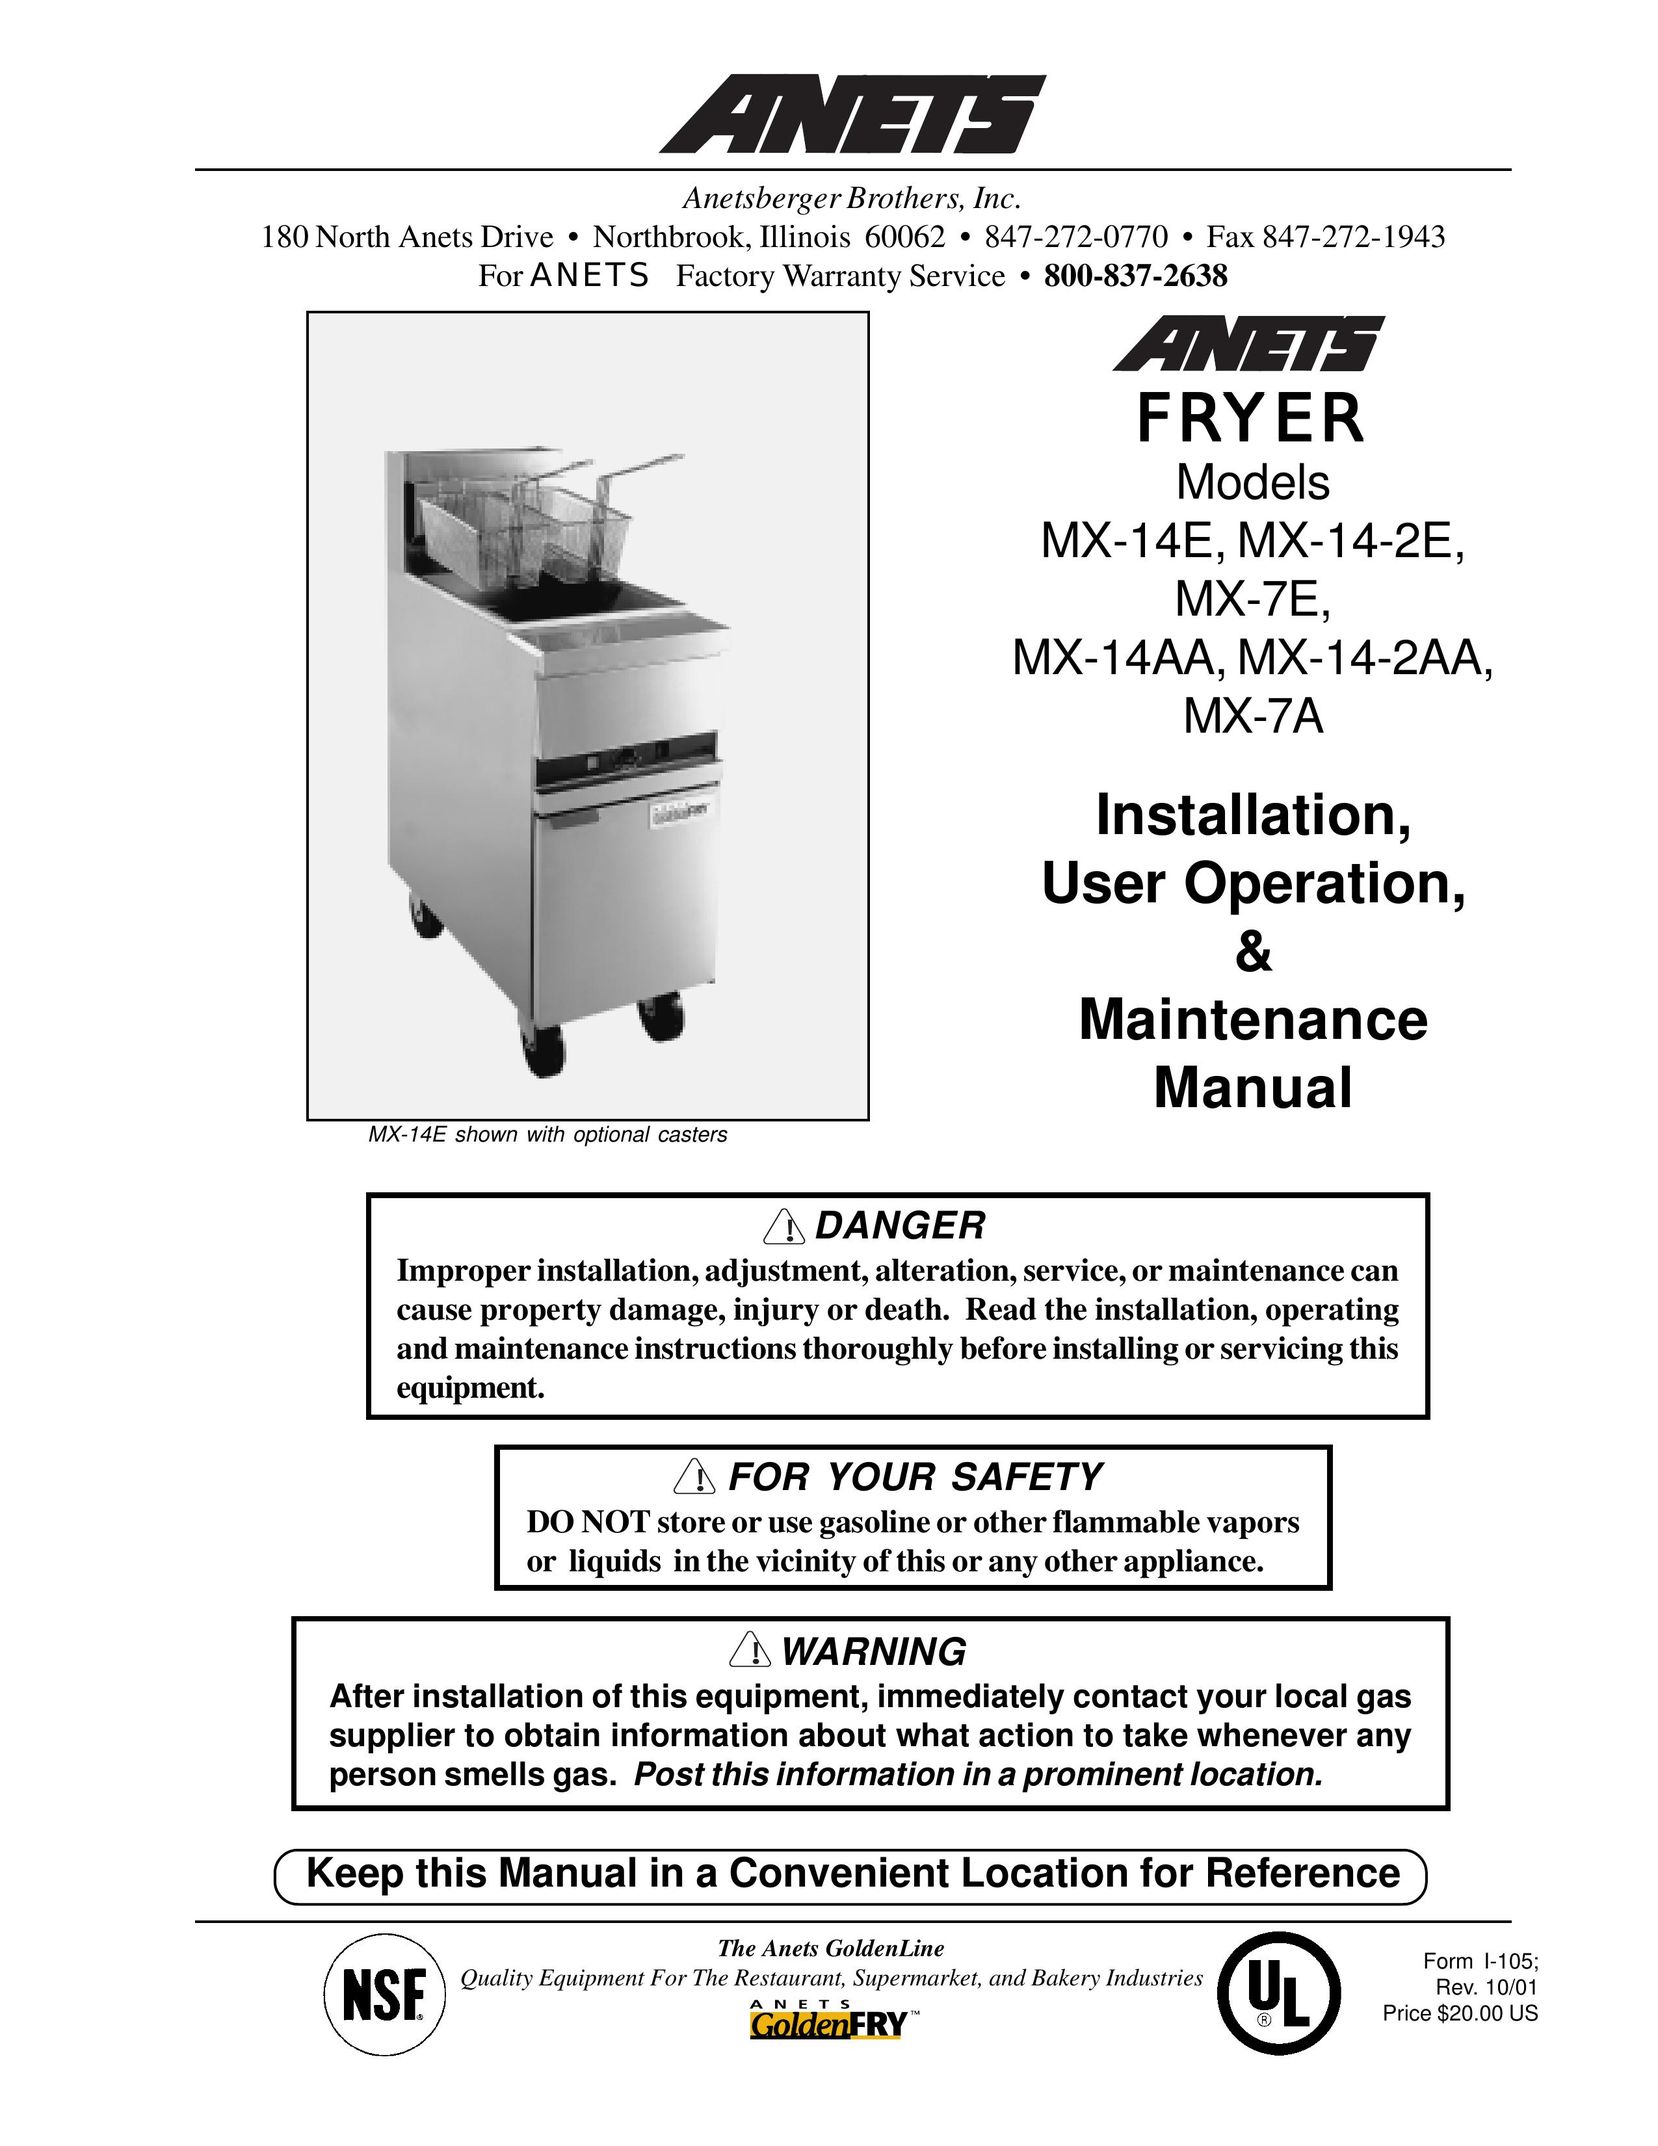 Anetsberger Brothers MX-14-2AA Fryer User Manual